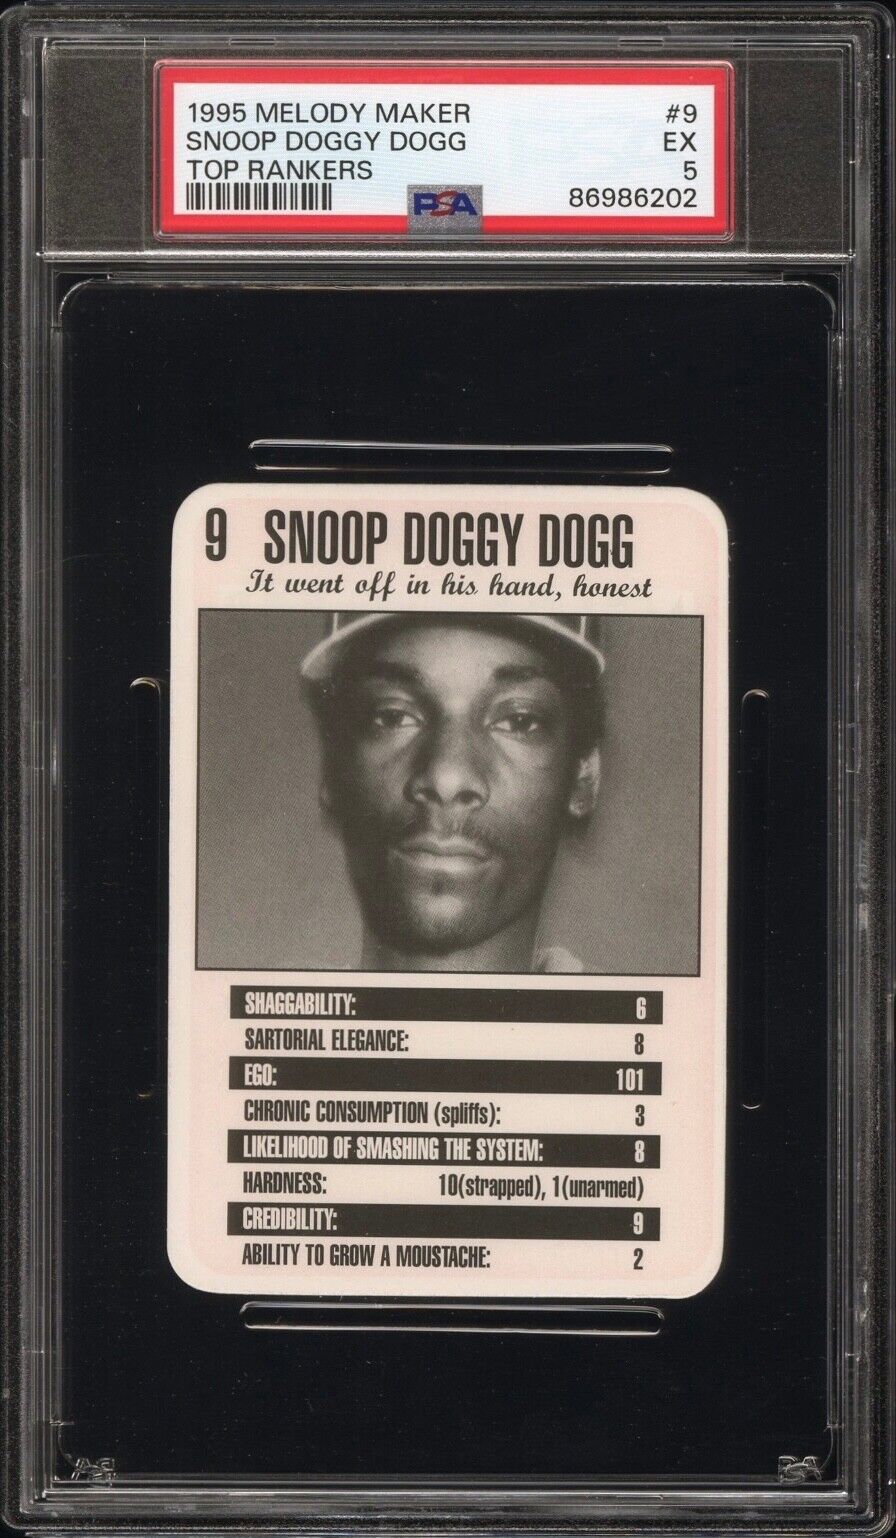 1995 SNOOP DOGGY DOGG Melody Maker Top Rankers #9 PSA 5 Rookie RC